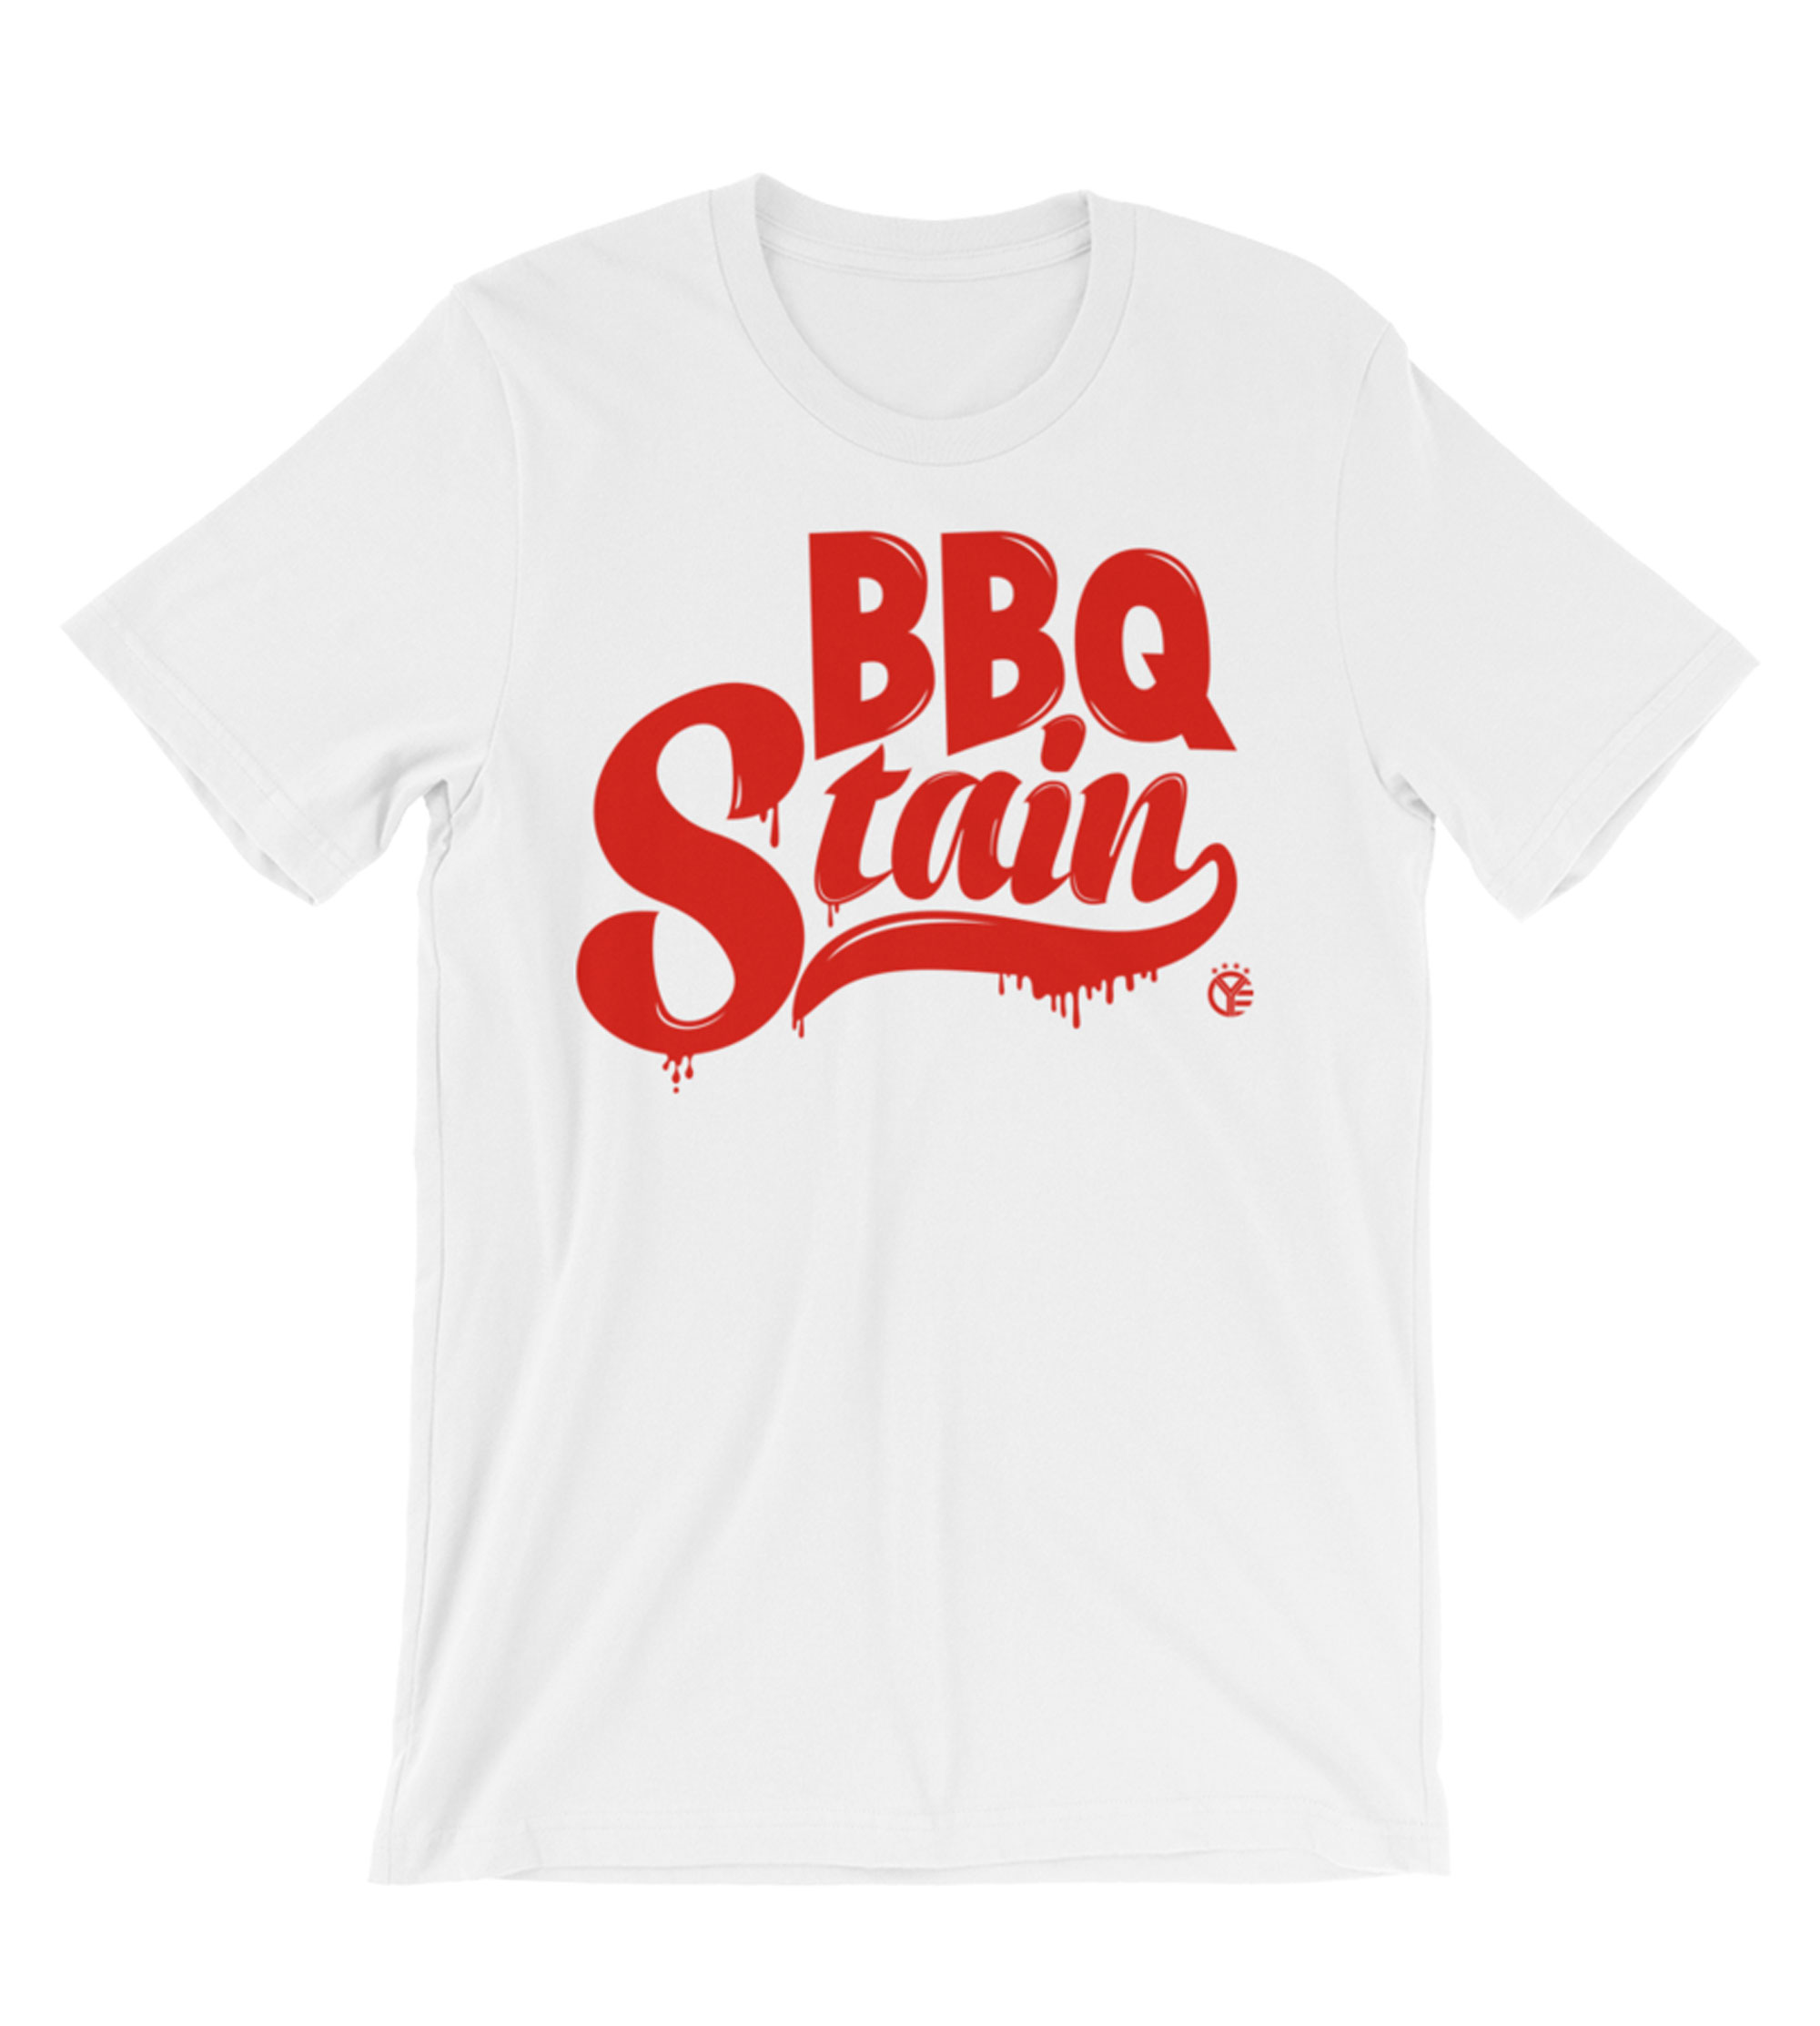 Online bbq stain on my white t shirt chords and pick